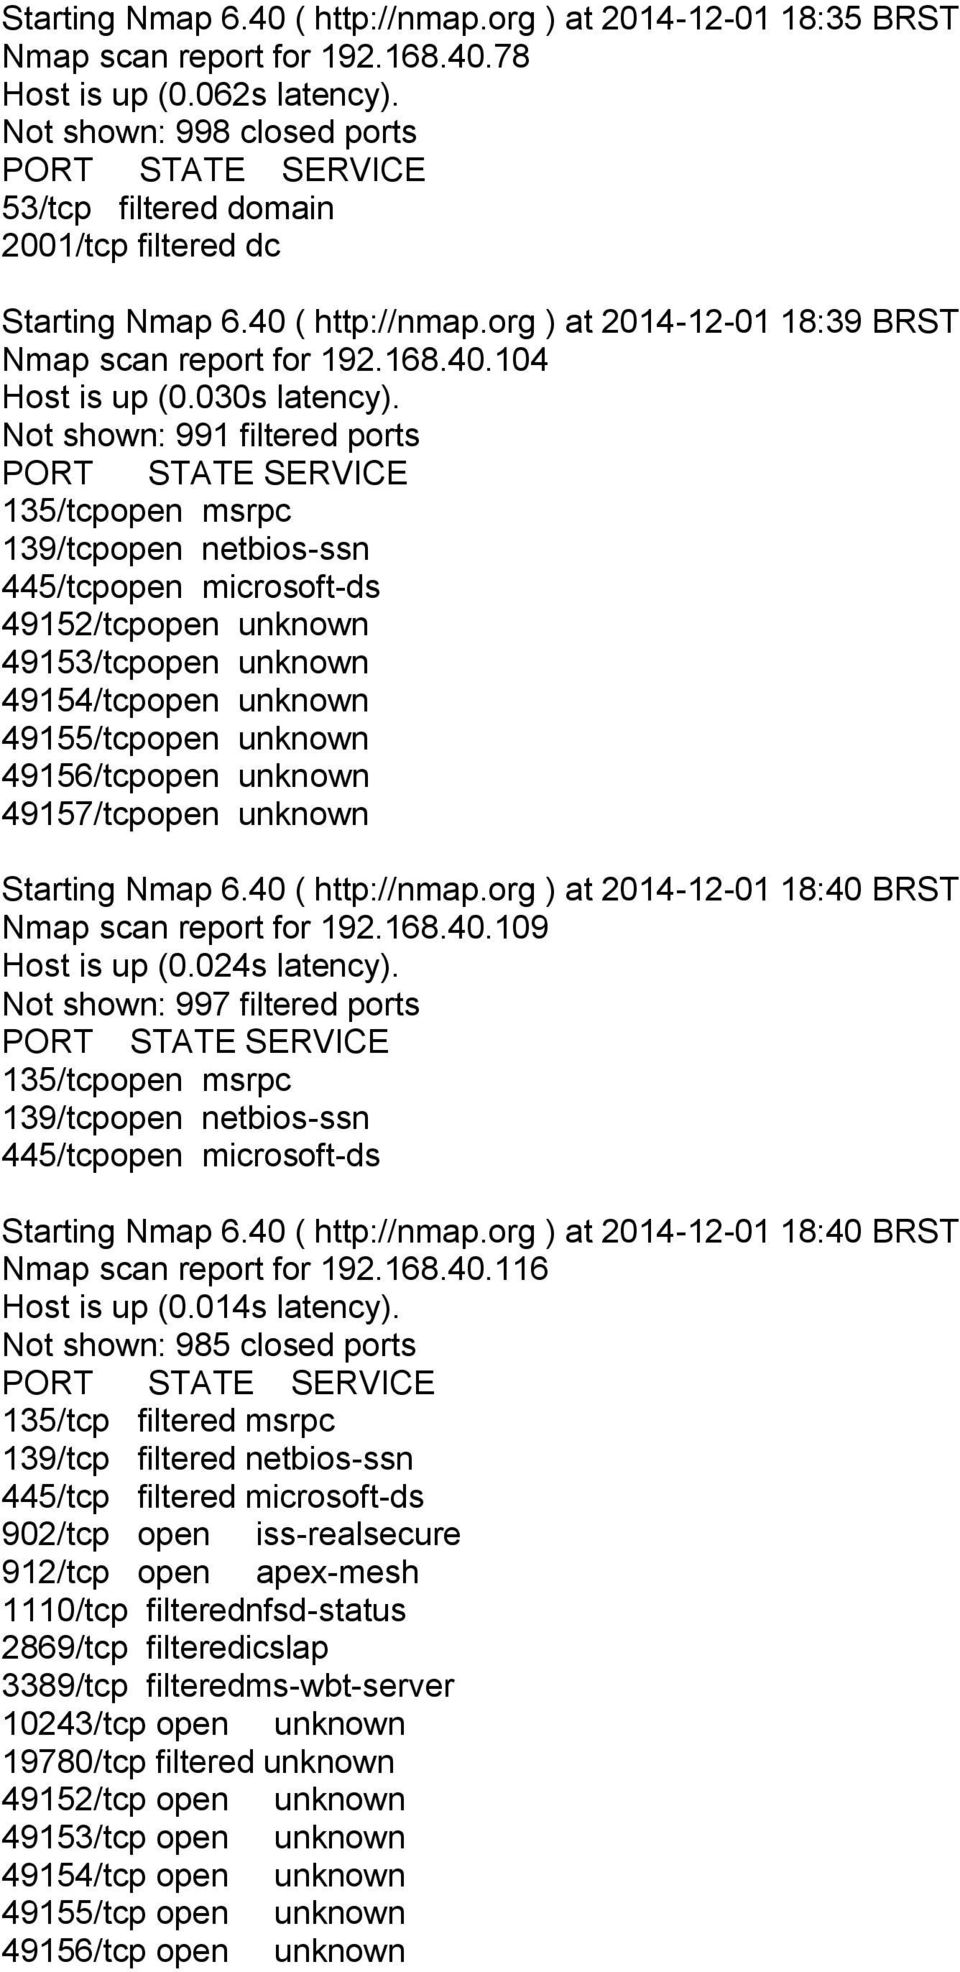 40 ( http://nmap.org ) at 2014-12-01 18:40 BRST Nmap scan report for 192.168.40.109 Host is up (0.024s latency). Not shown: 997 filtered ports Starting Nmap 6.40 ( http://nmap.org ) at 2014-12-01 18:40 BRST Nmap scan report for 192.168.40.116 Host is up (0.